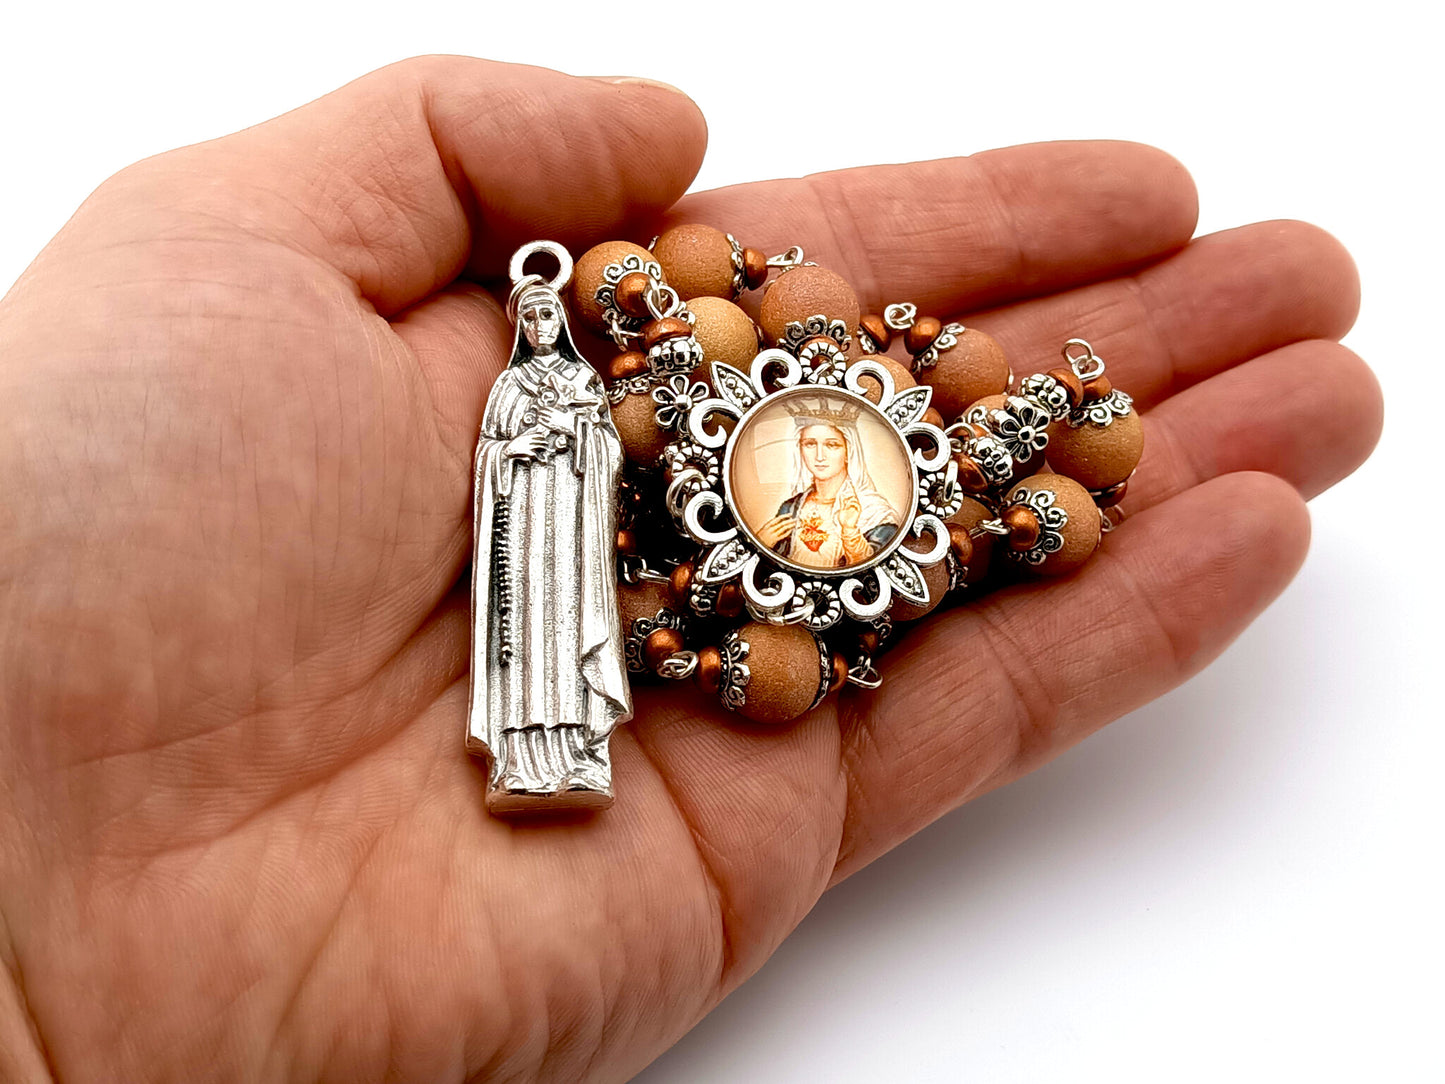 Saint Therese of Lisieux unique rosary beads prayer chaplet with buff textured glass beads, silver picture centre medal and statue end medal.